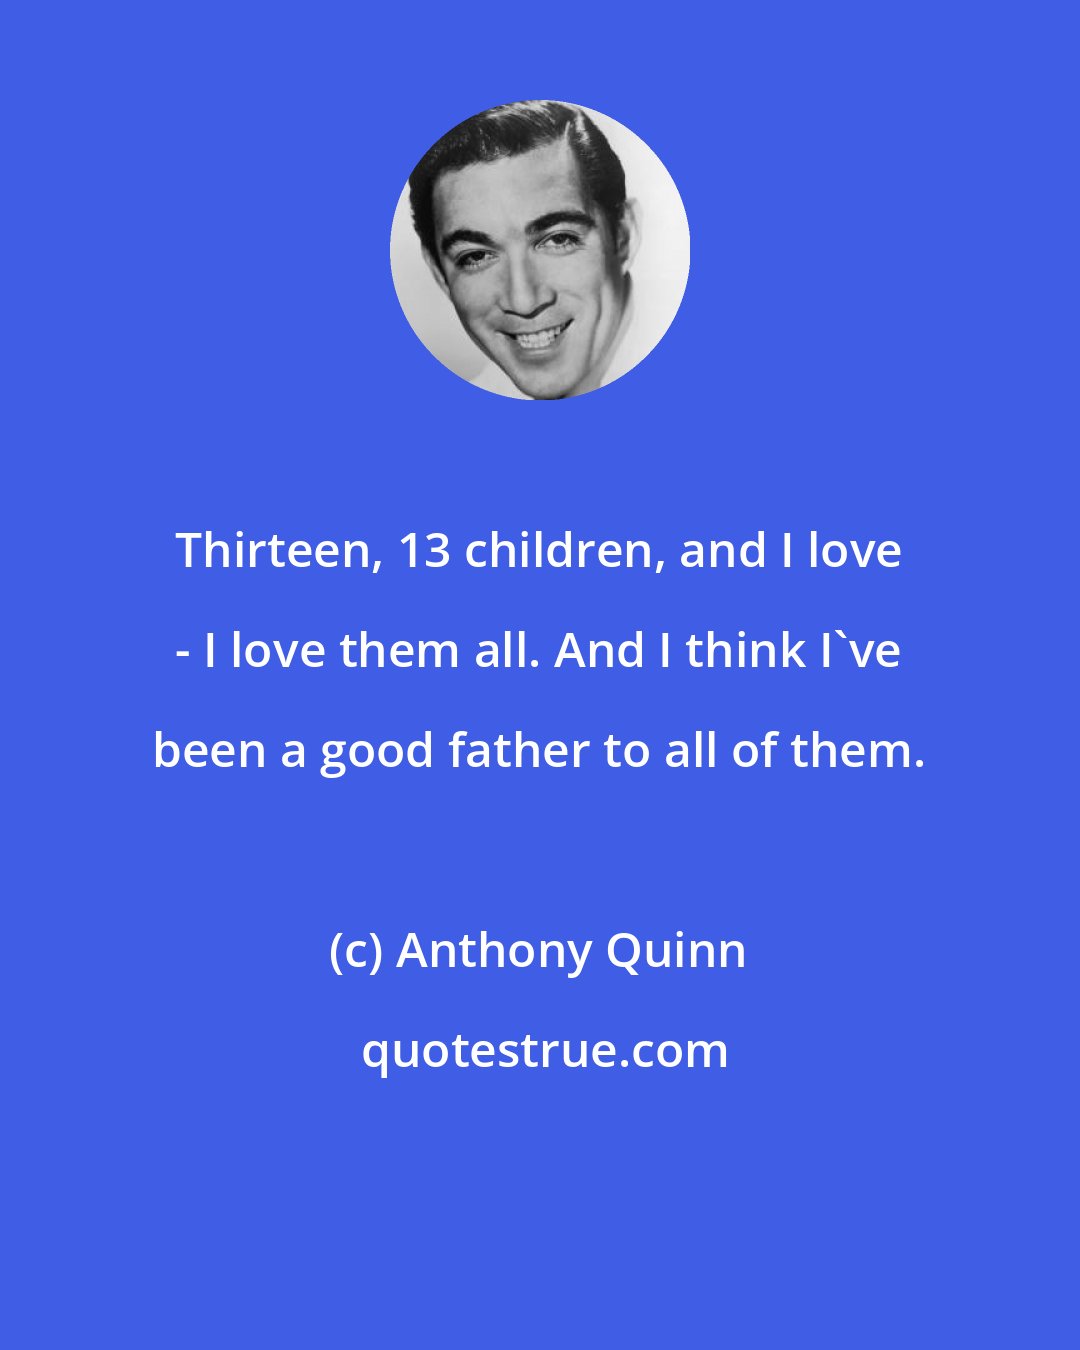 Anthony Quinn: Thirteen, 13 children, and I love - I love them all. And I think I've been a good father to all of them.